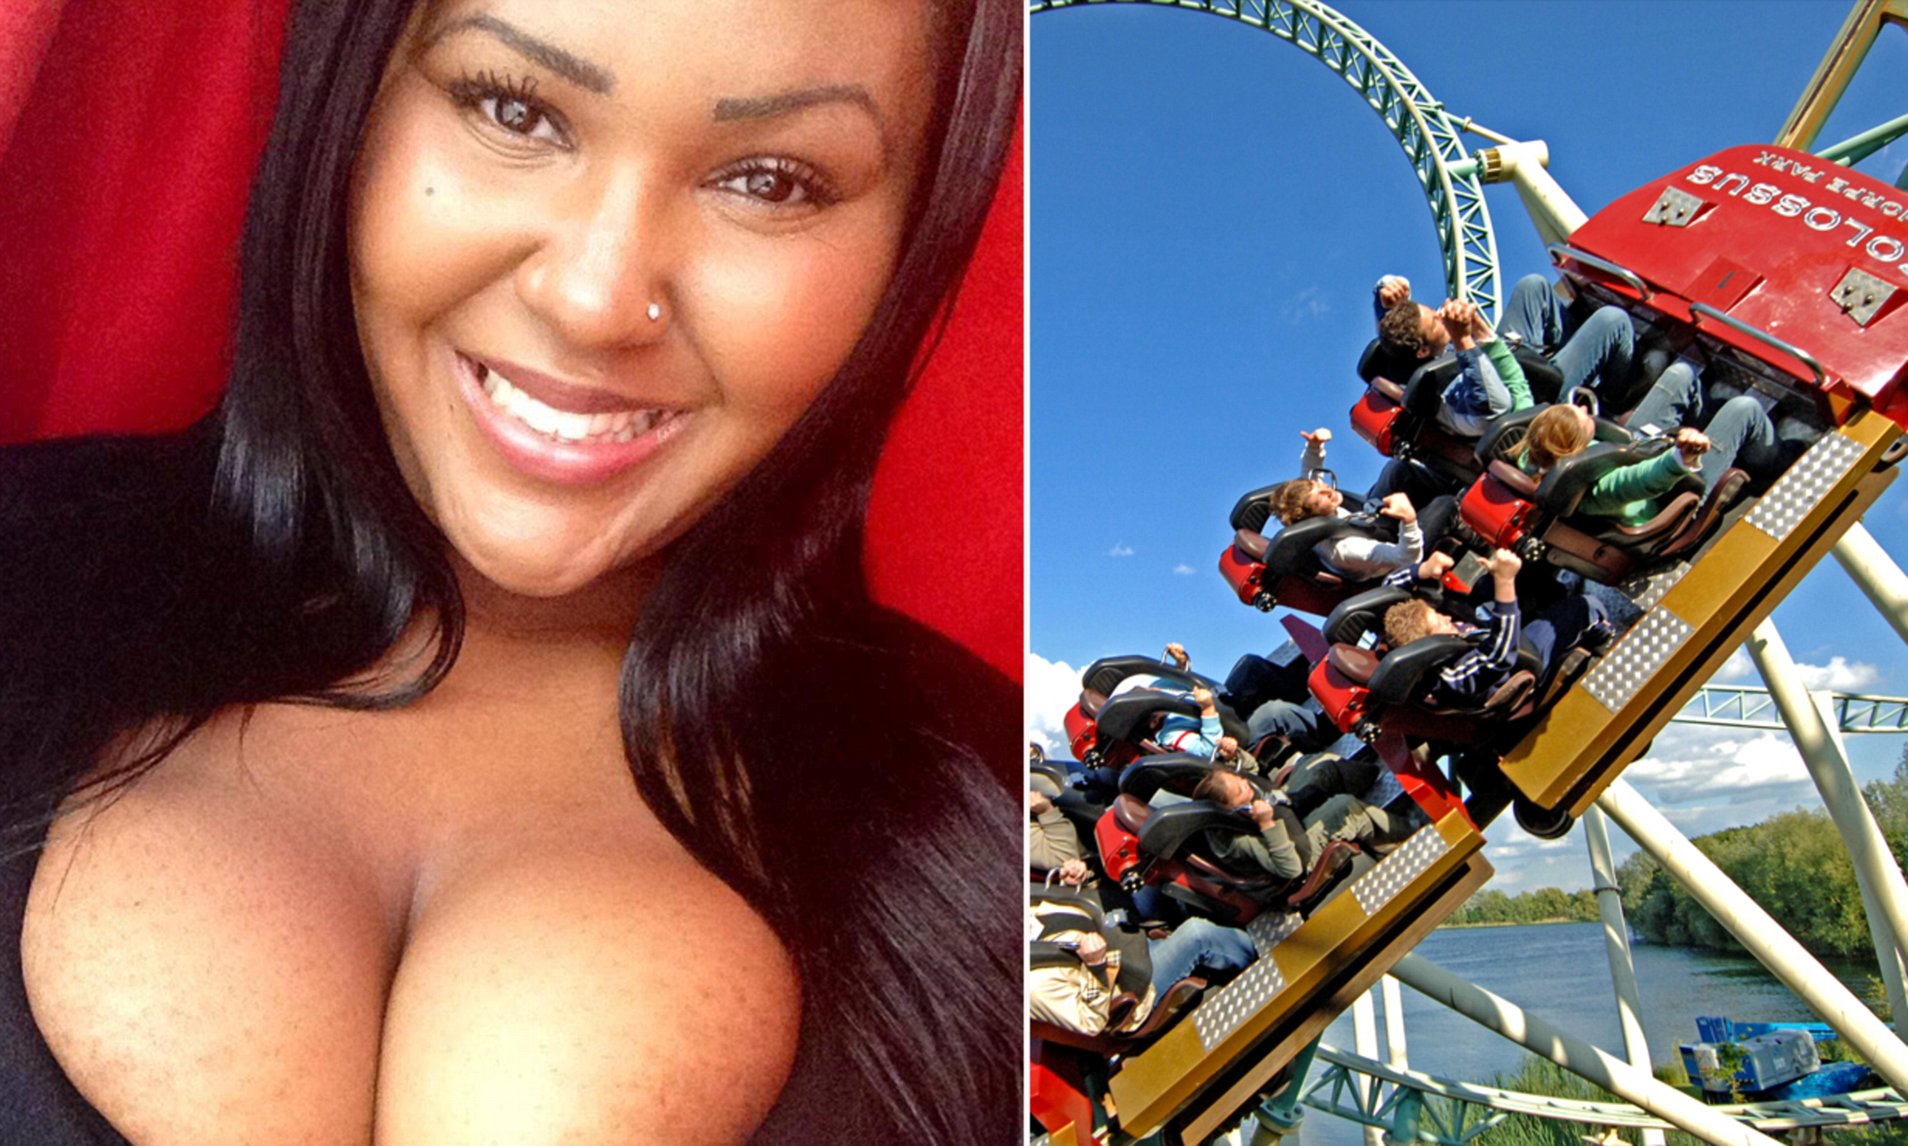 chaz baker recommends Boobs Fall Out On Roller Coaster